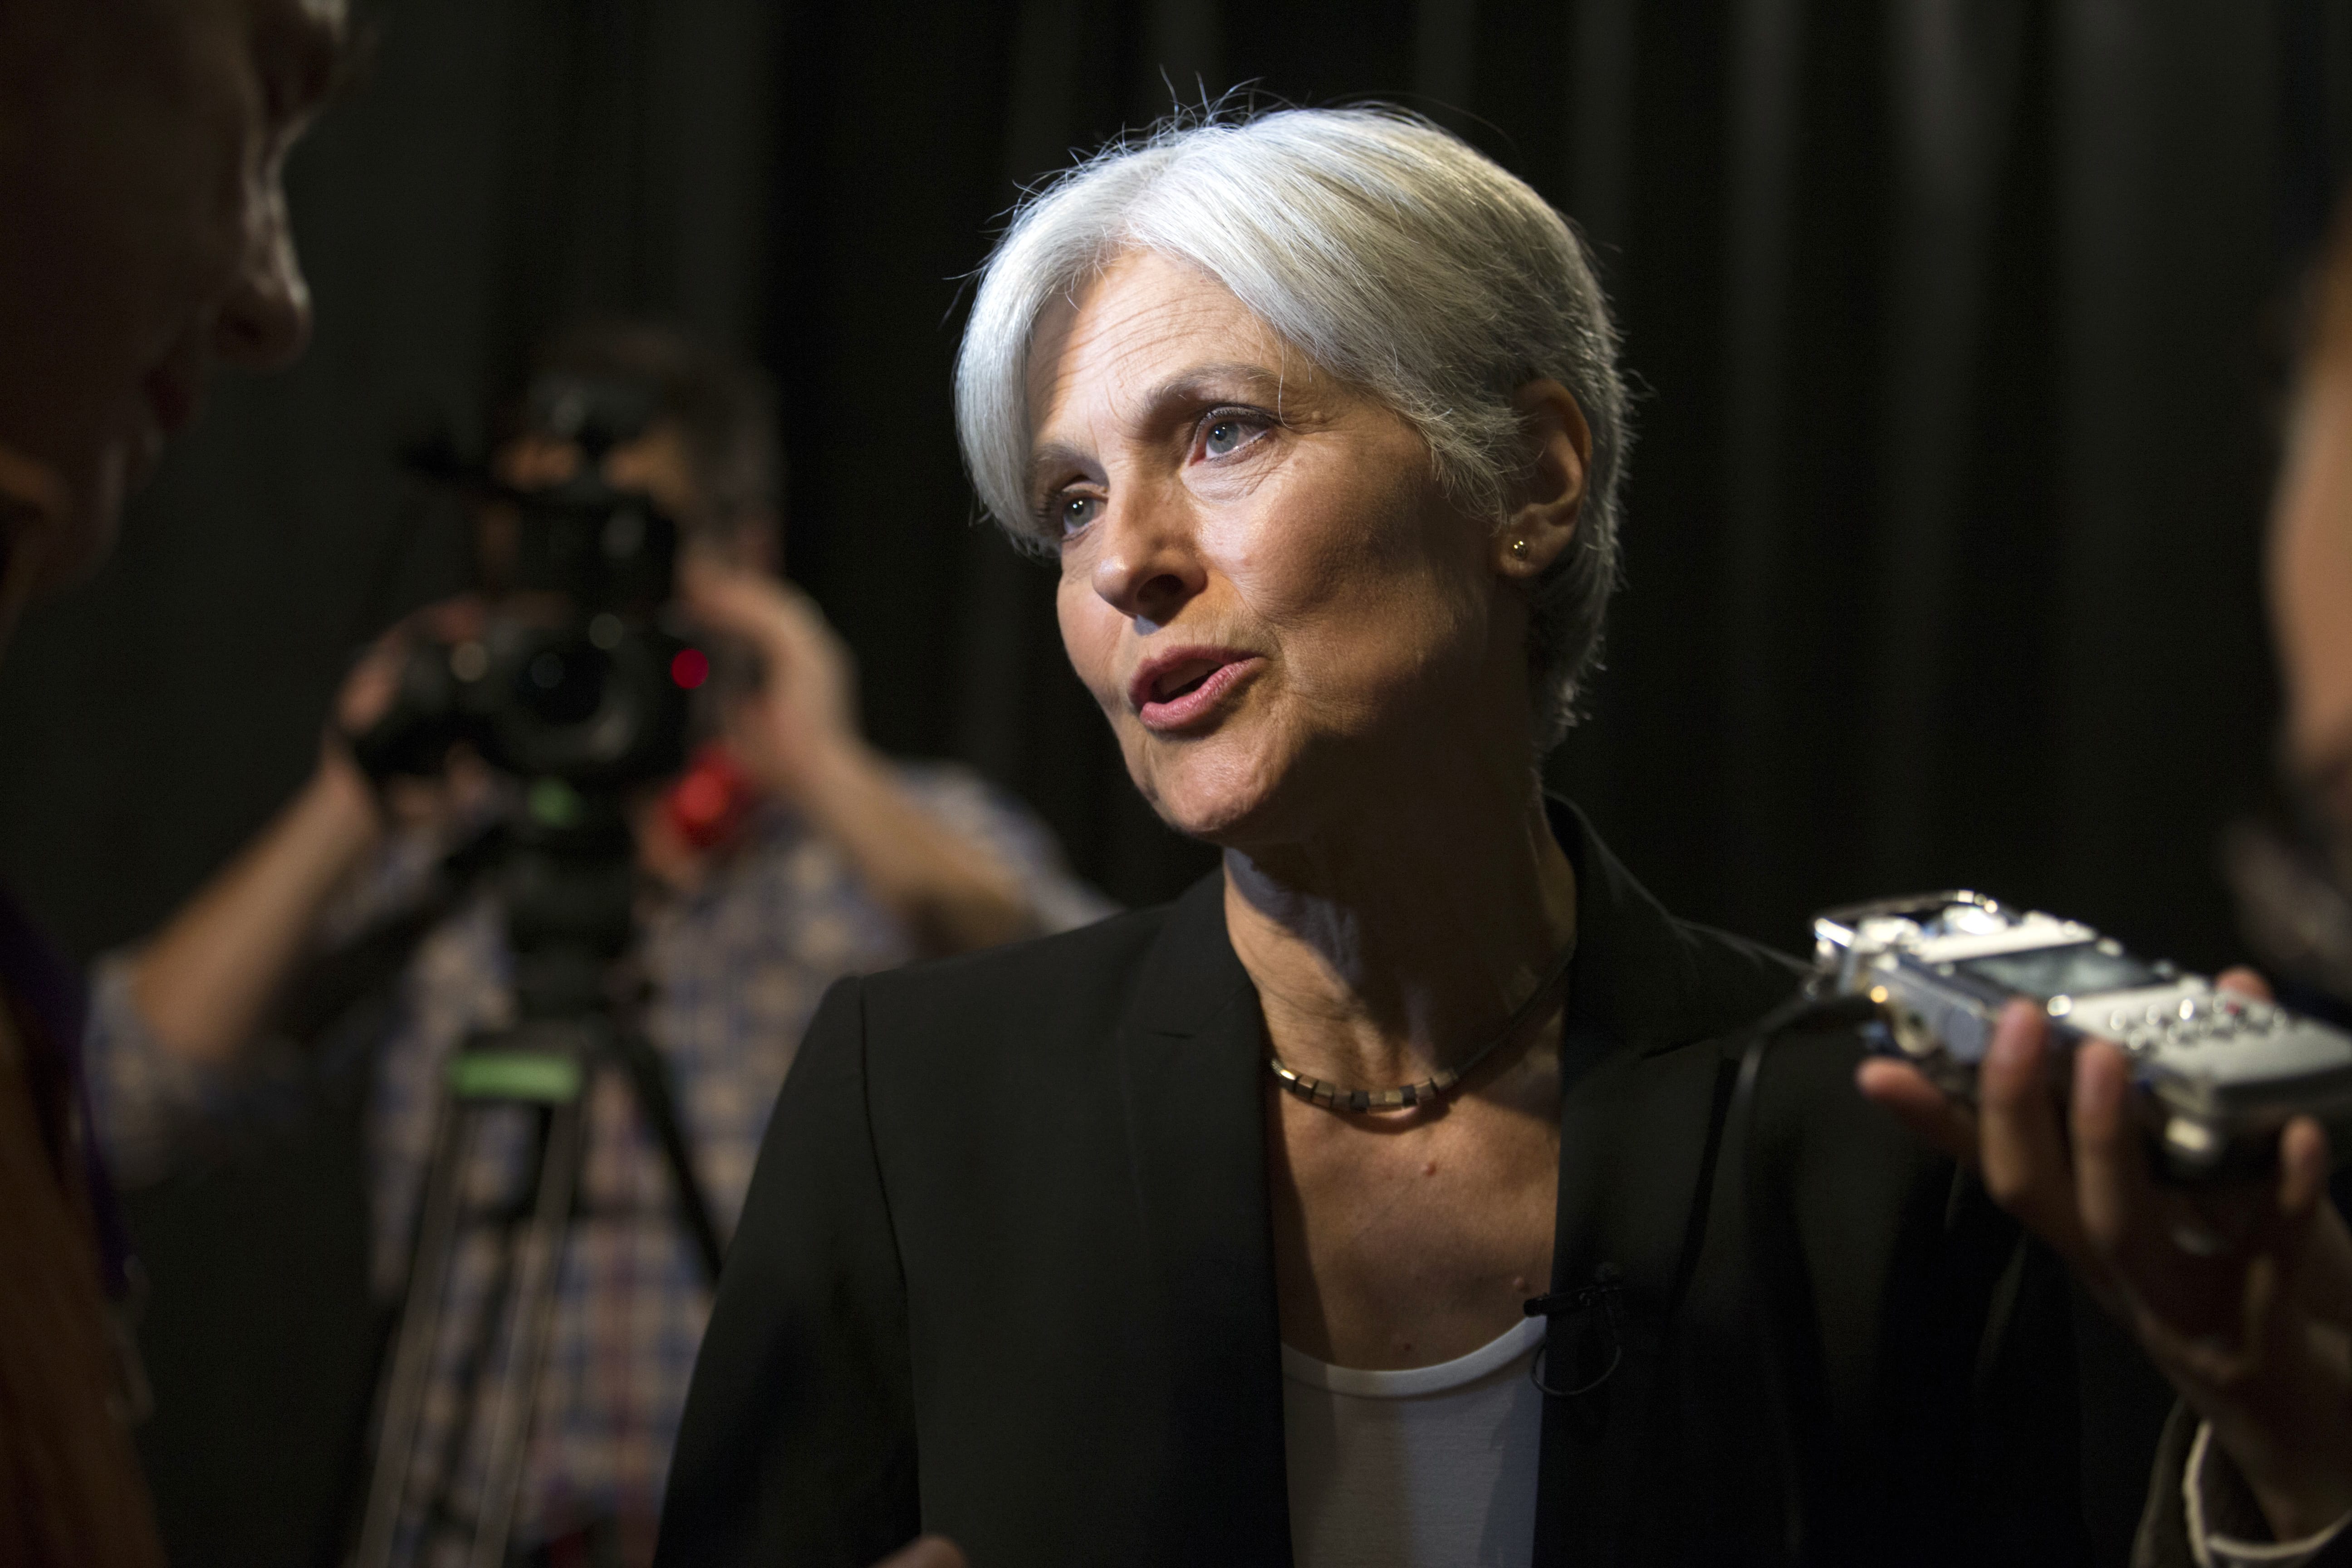 Green party presidential candidate Jill Stein answers questions from members of the media during a campaign stop at Humanist Hall in Oakland, Calif. on Thursday, Oct. 6, 2016. (AP Photo/D.